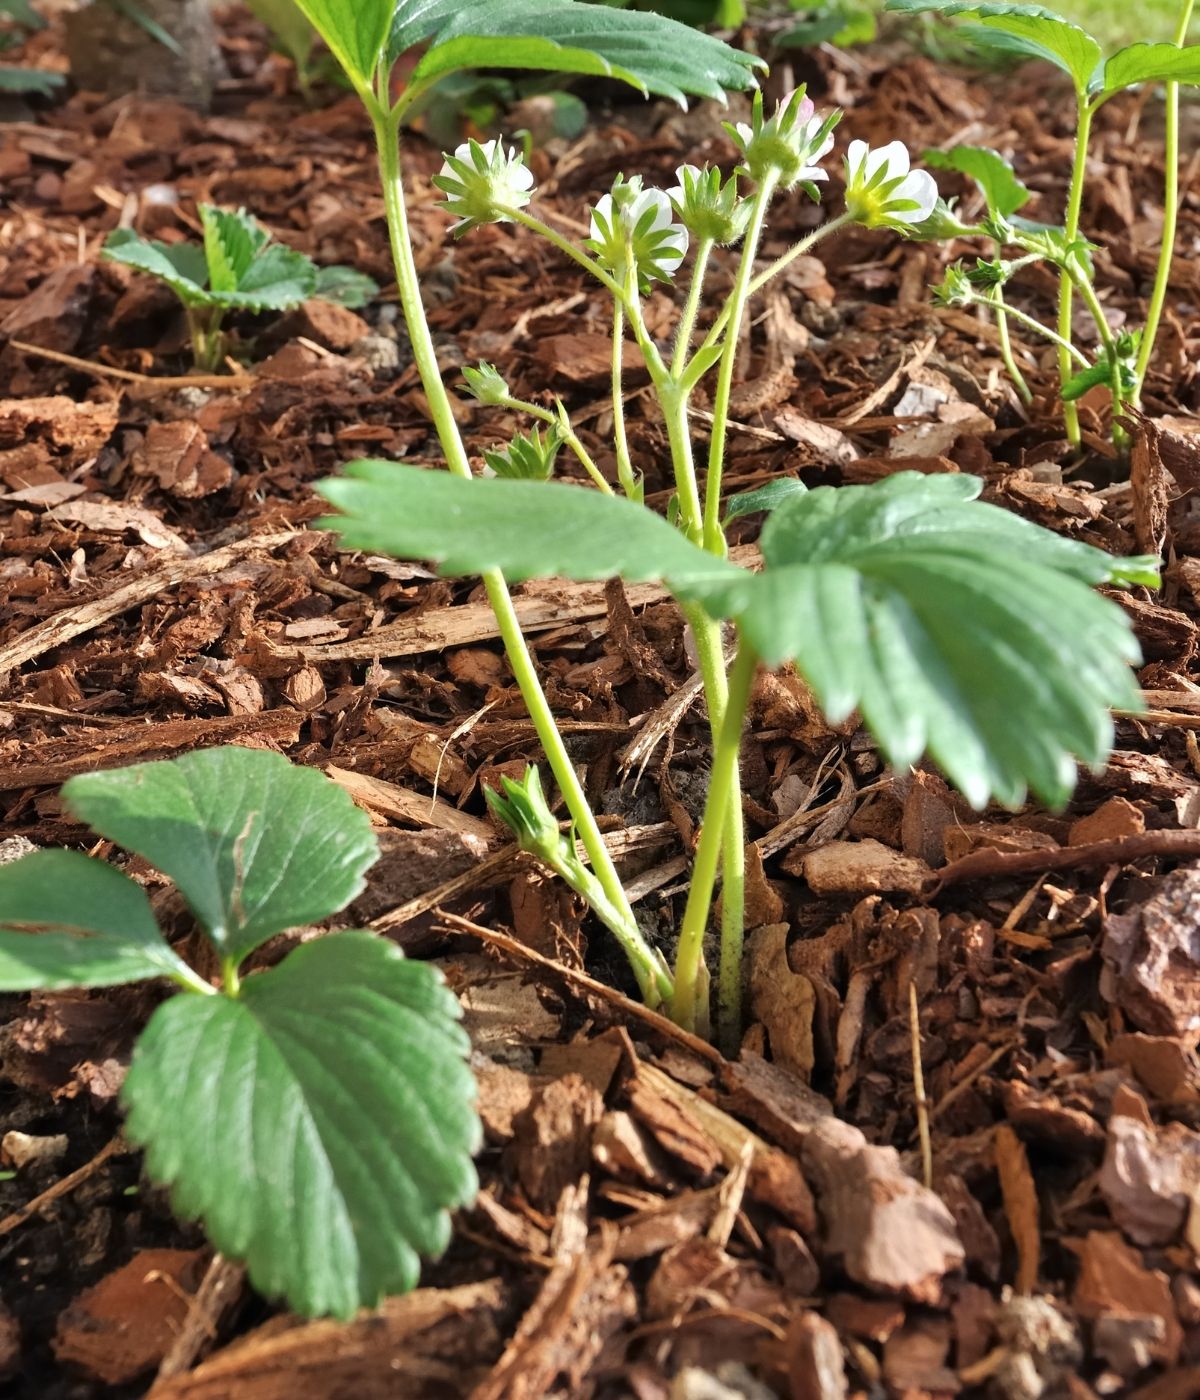 Mulched strawberry plants